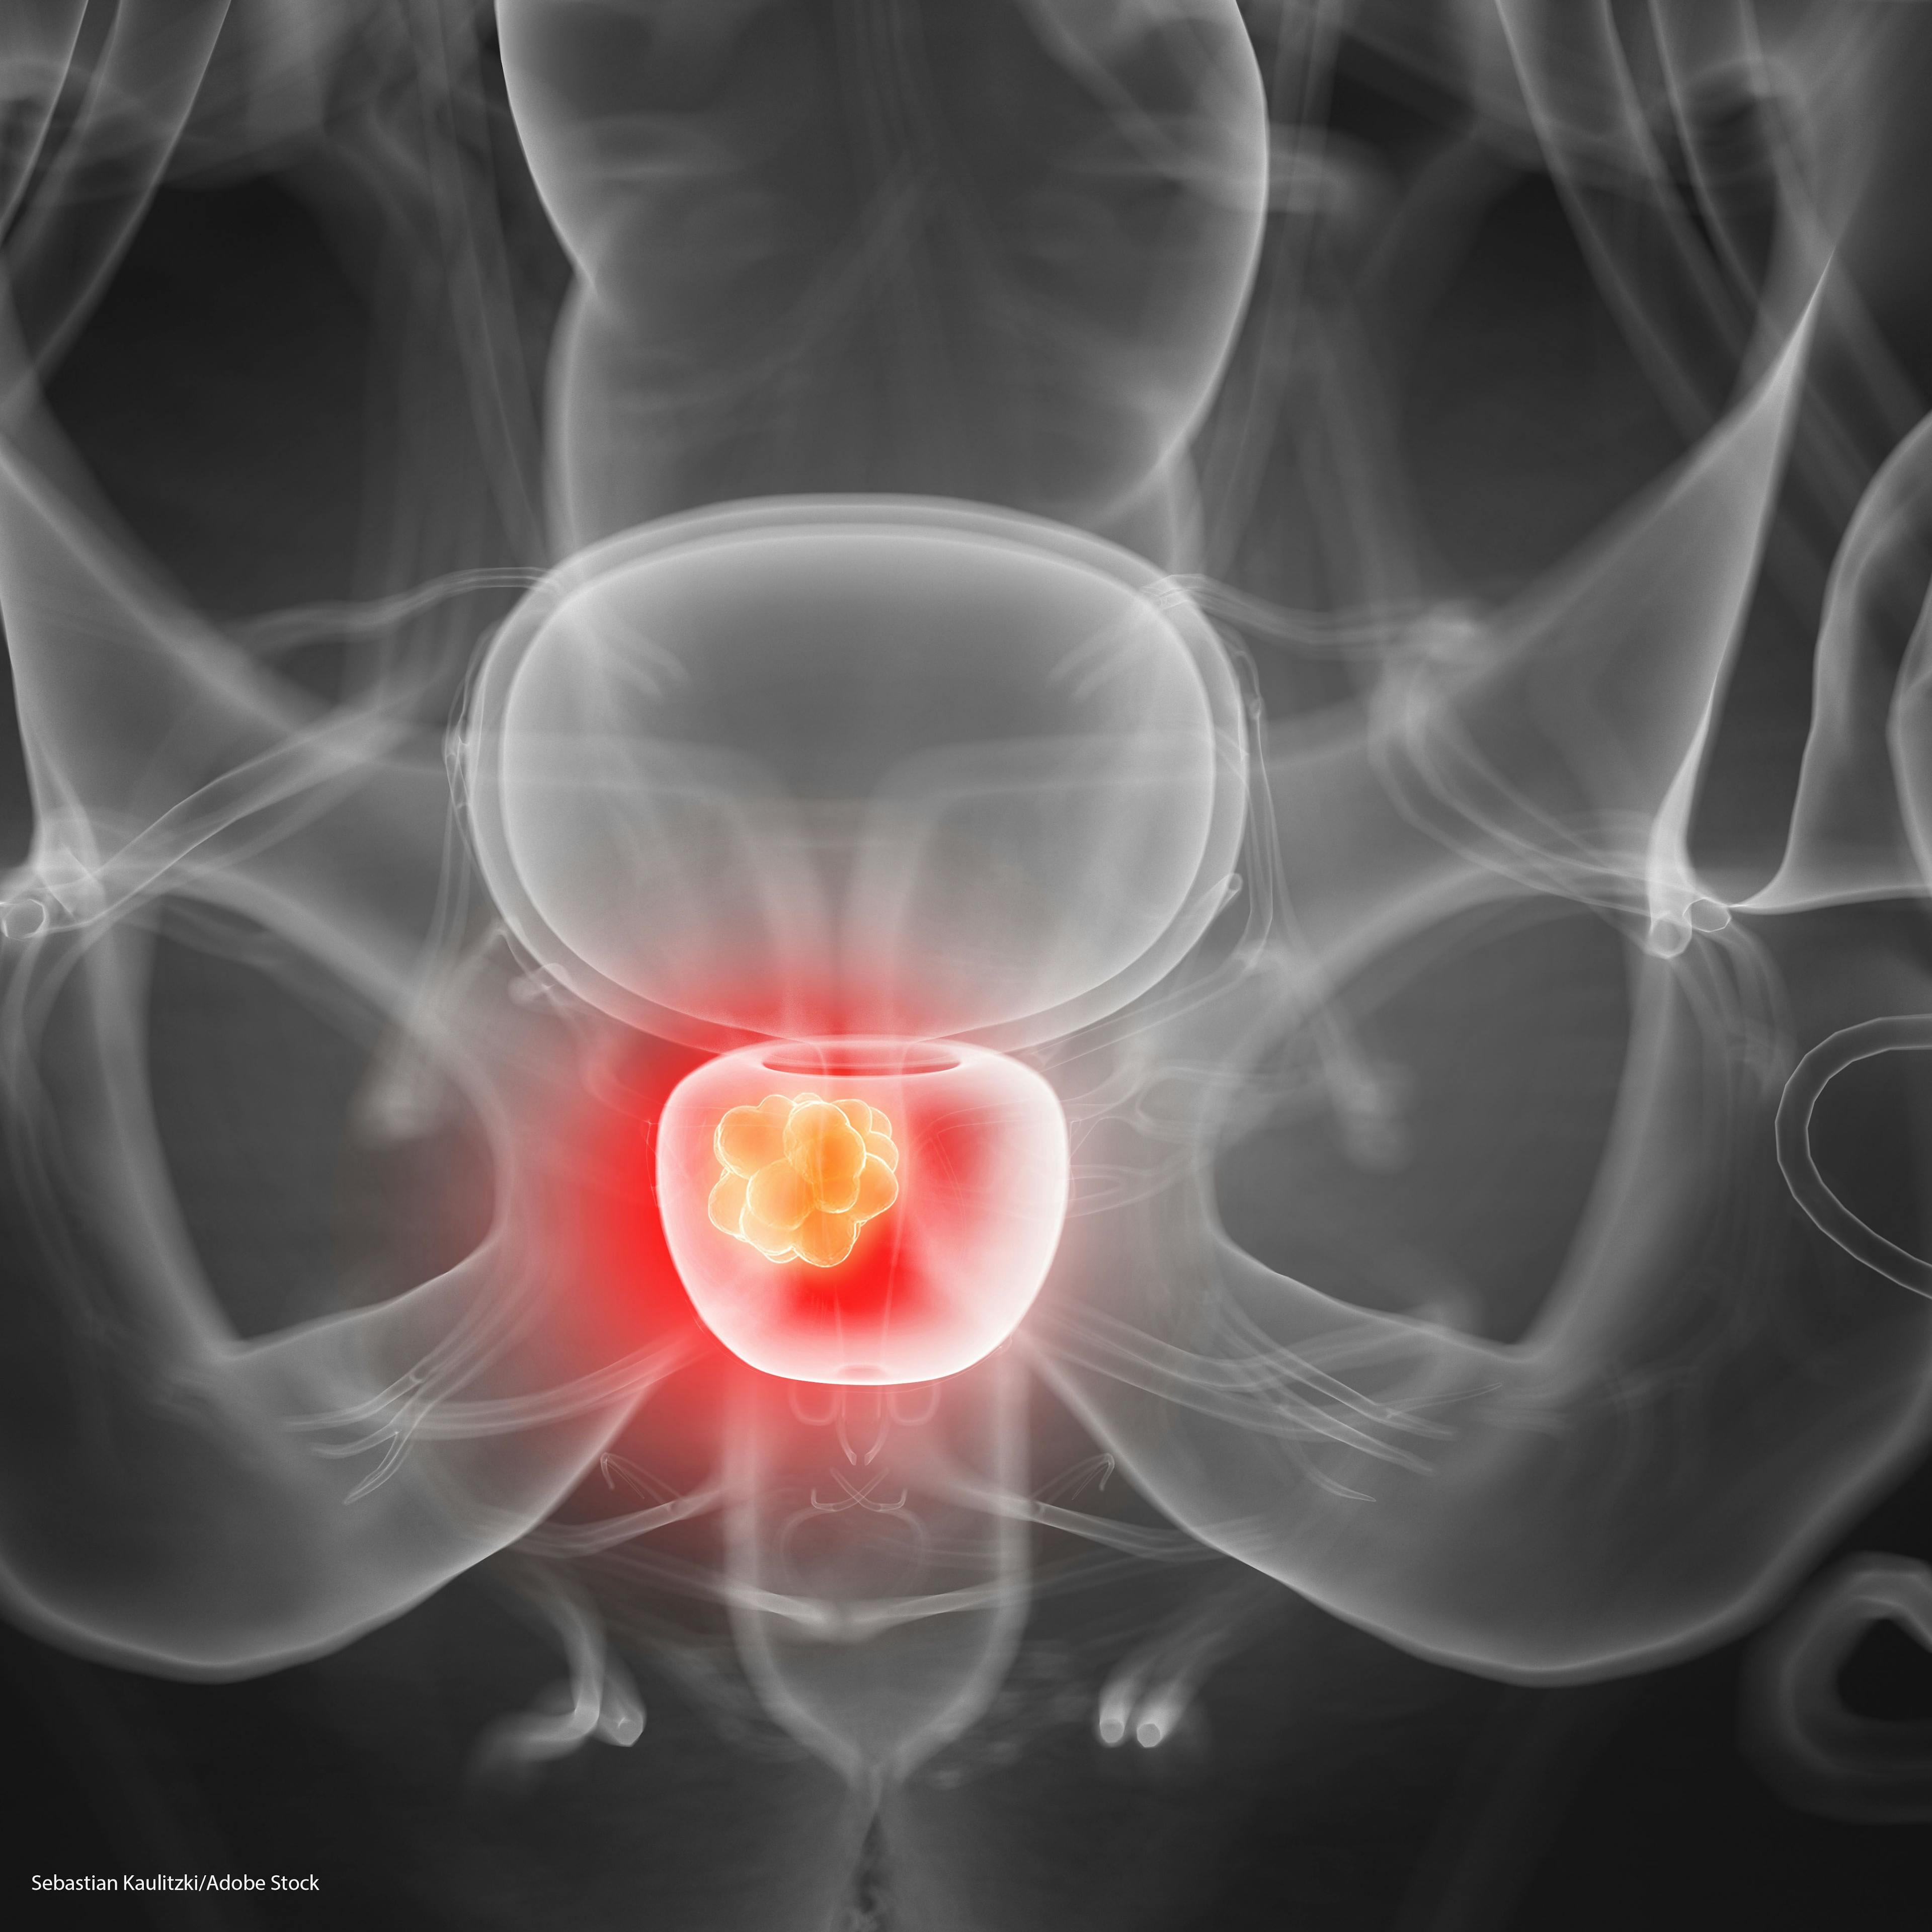 Tazemetostat continues to show safety, efficacy benefits in prostate cancer